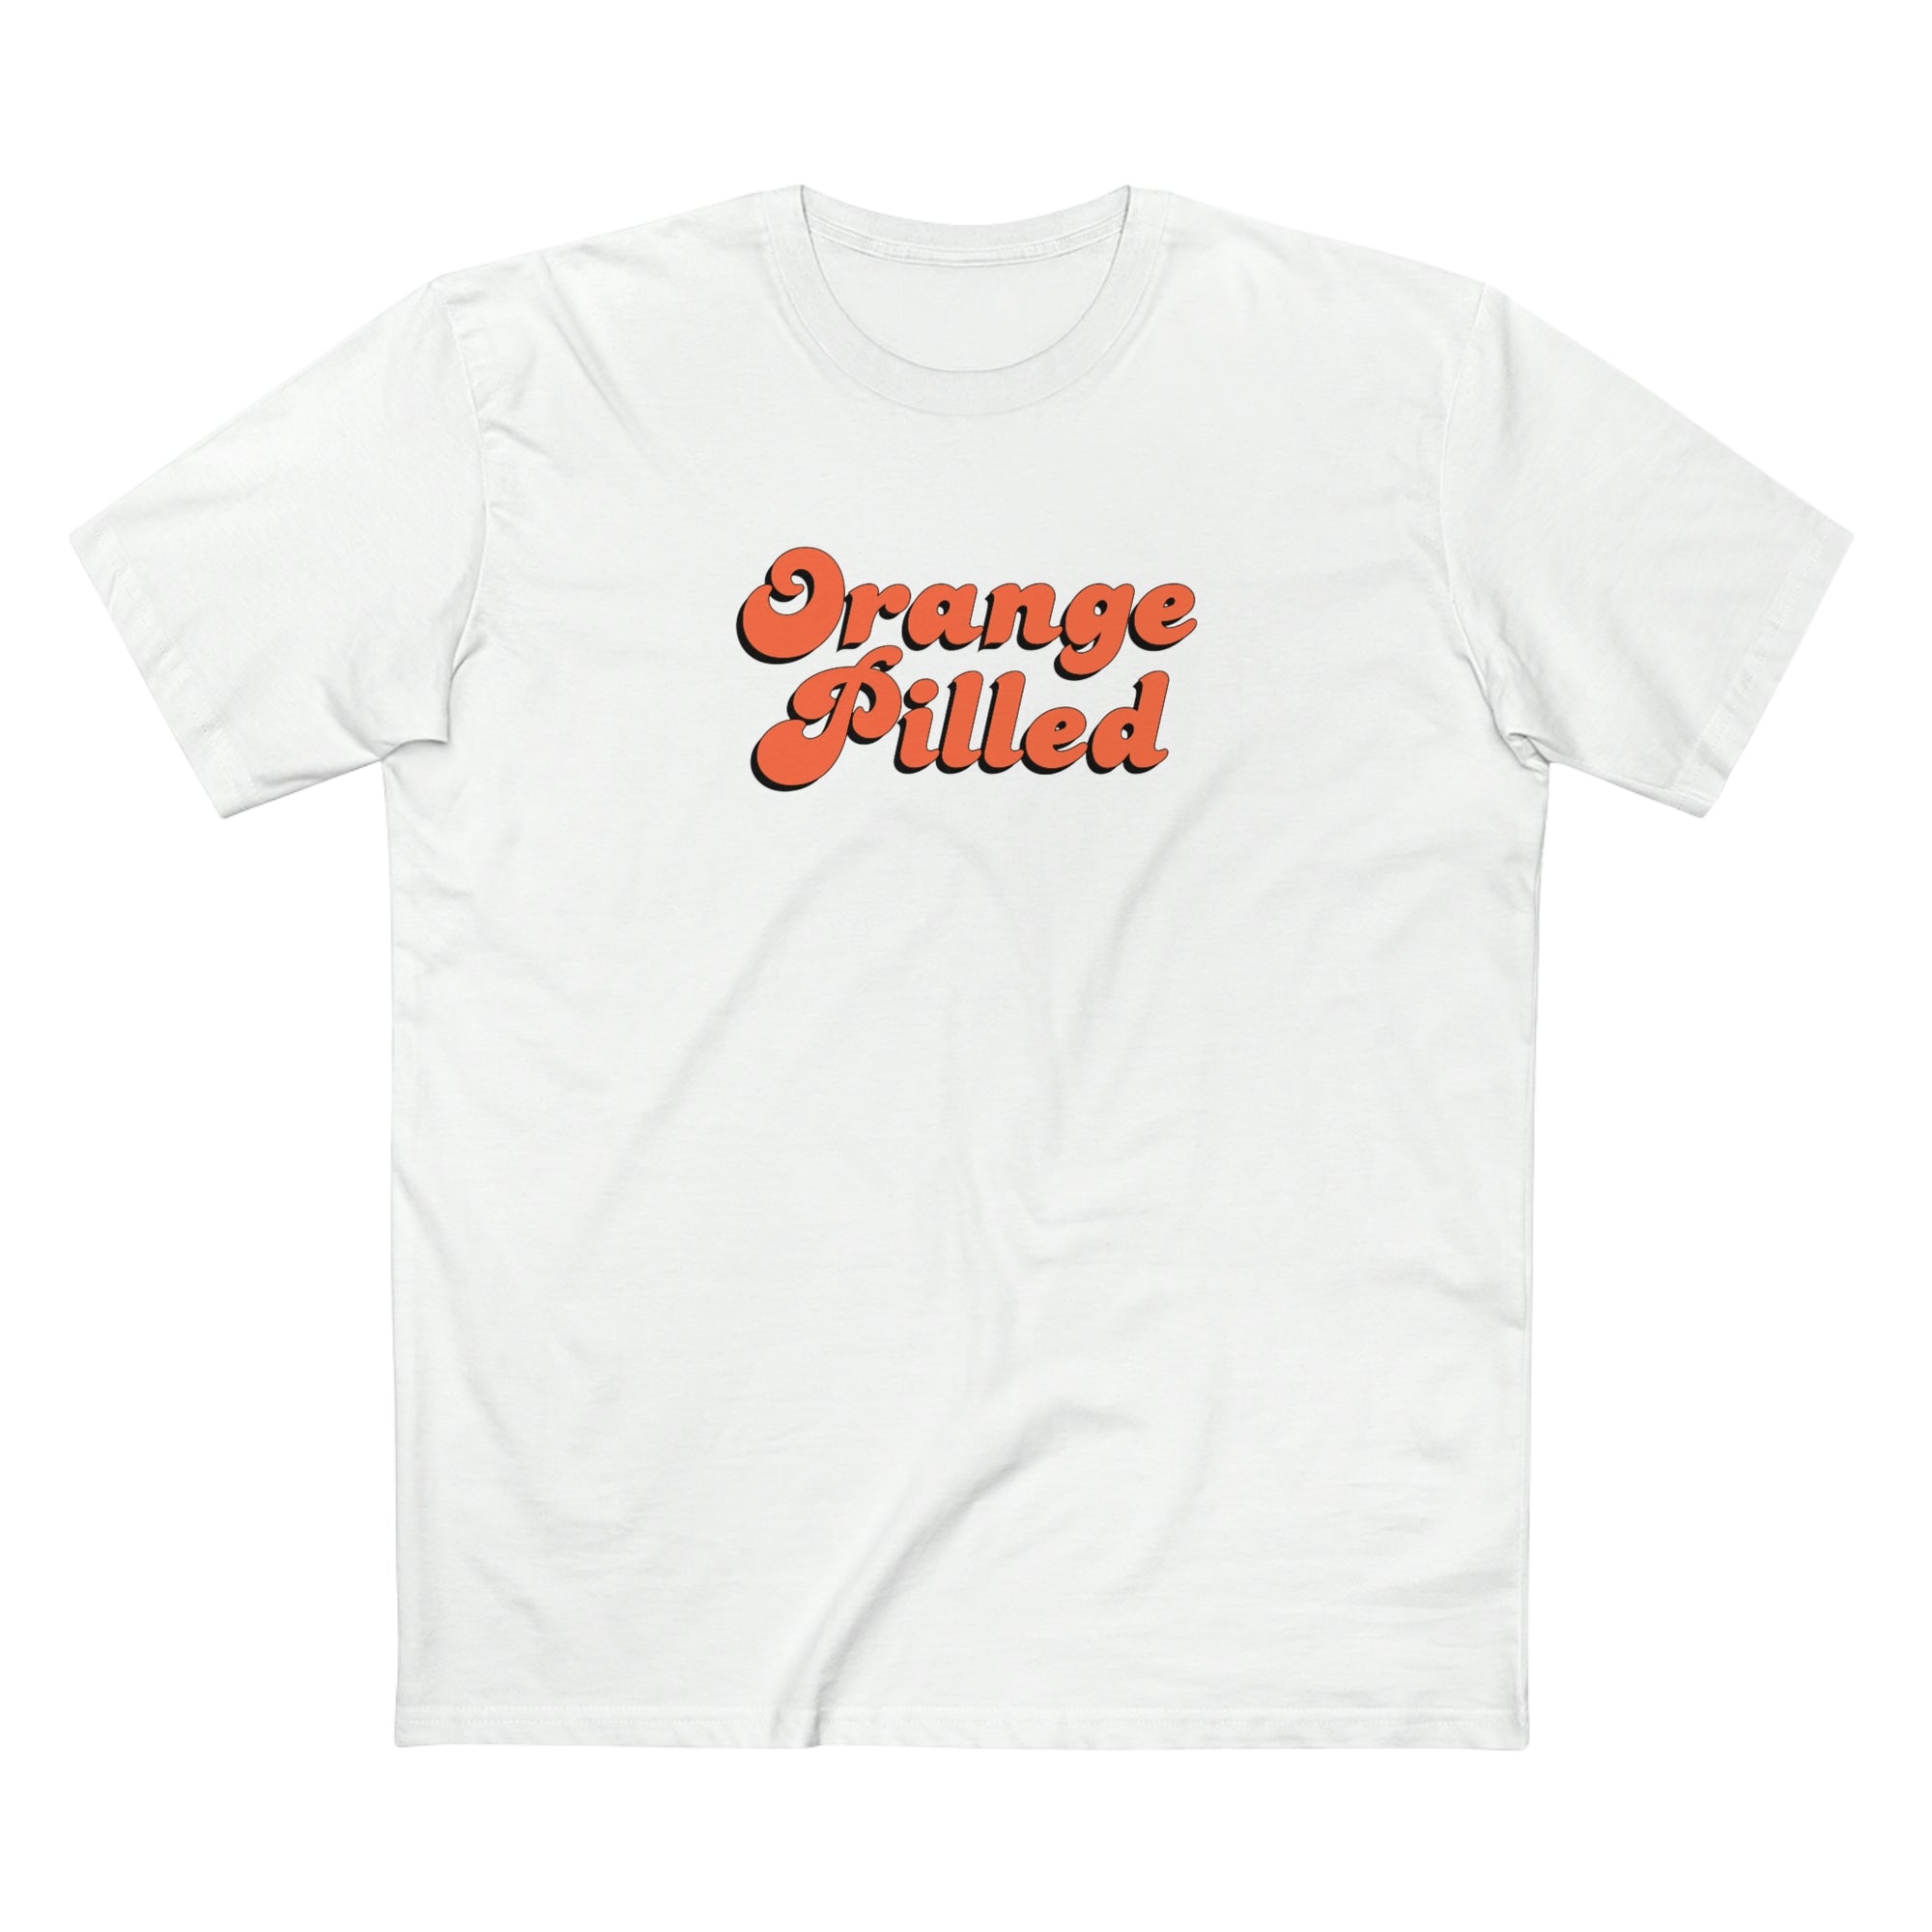 Bitcoin T Shirt - The Orange Pilled T-Shirt features a retro design. Color: White. Front view. 